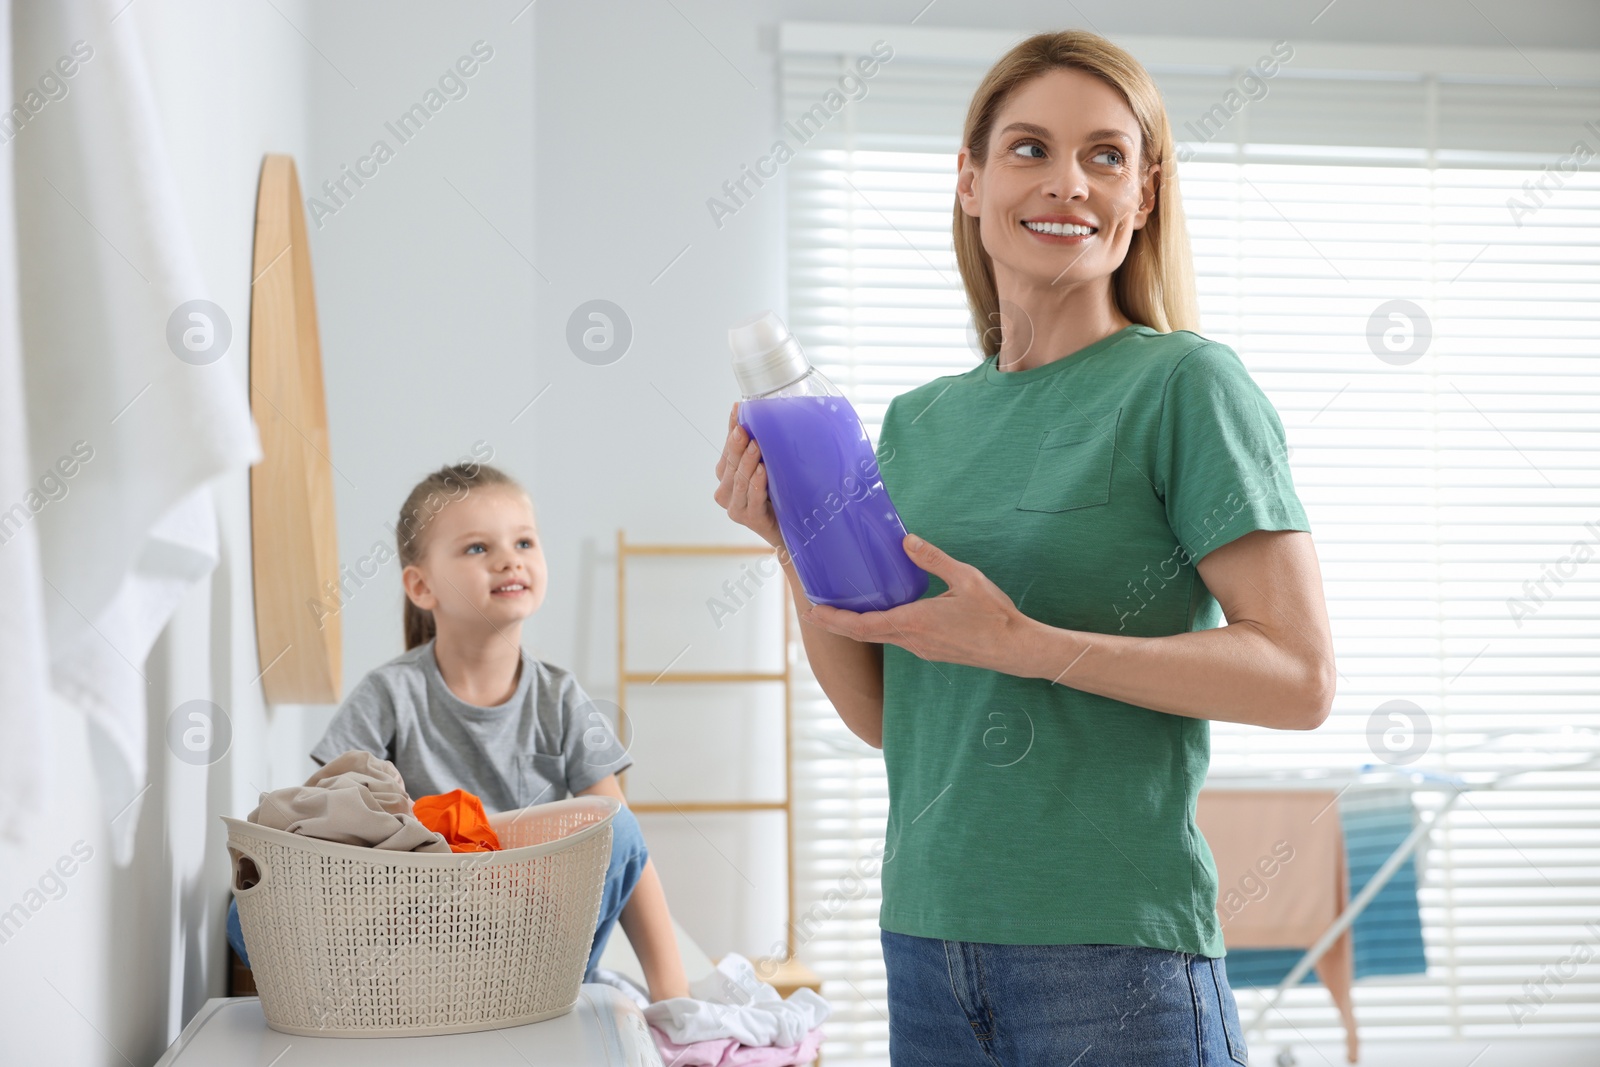 Photo of Mother holding fabric softener and daughter sitting near basket with dirty clothes in bathroom